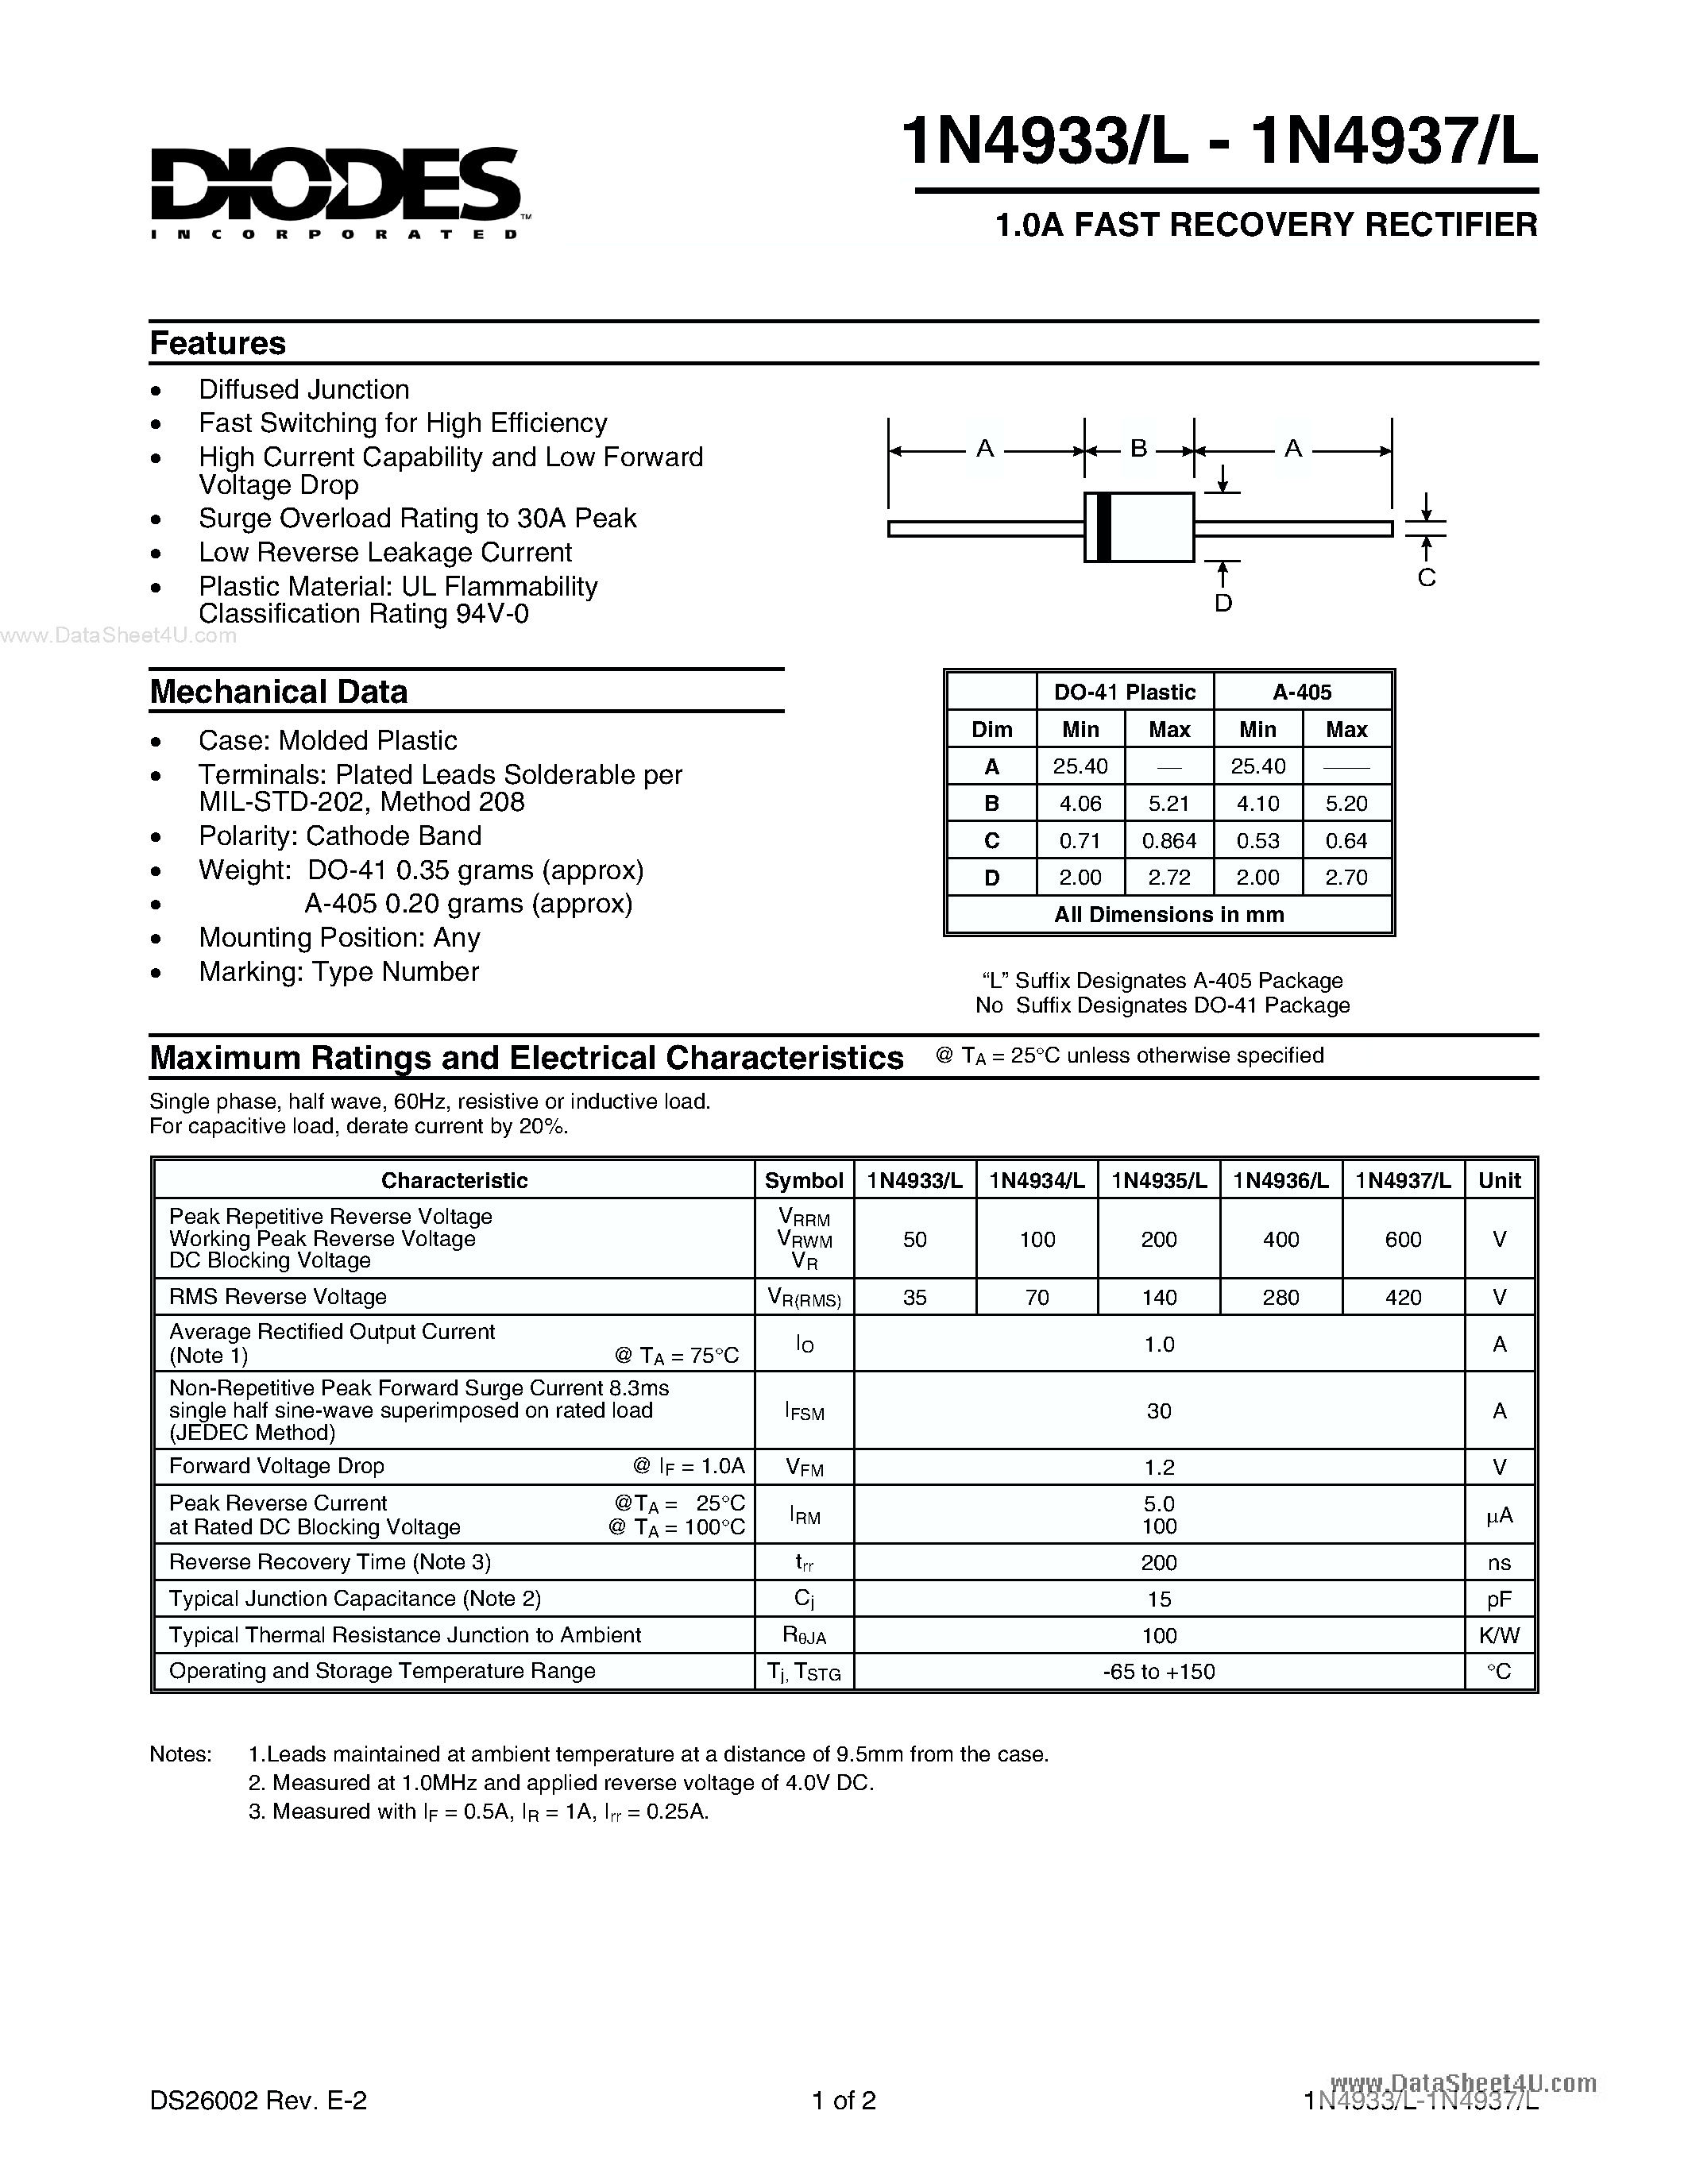 Datasheet IN4933 - (IN4933x - IN4937x) 1.0A FAST RECOVERY RECTIFIER page 1